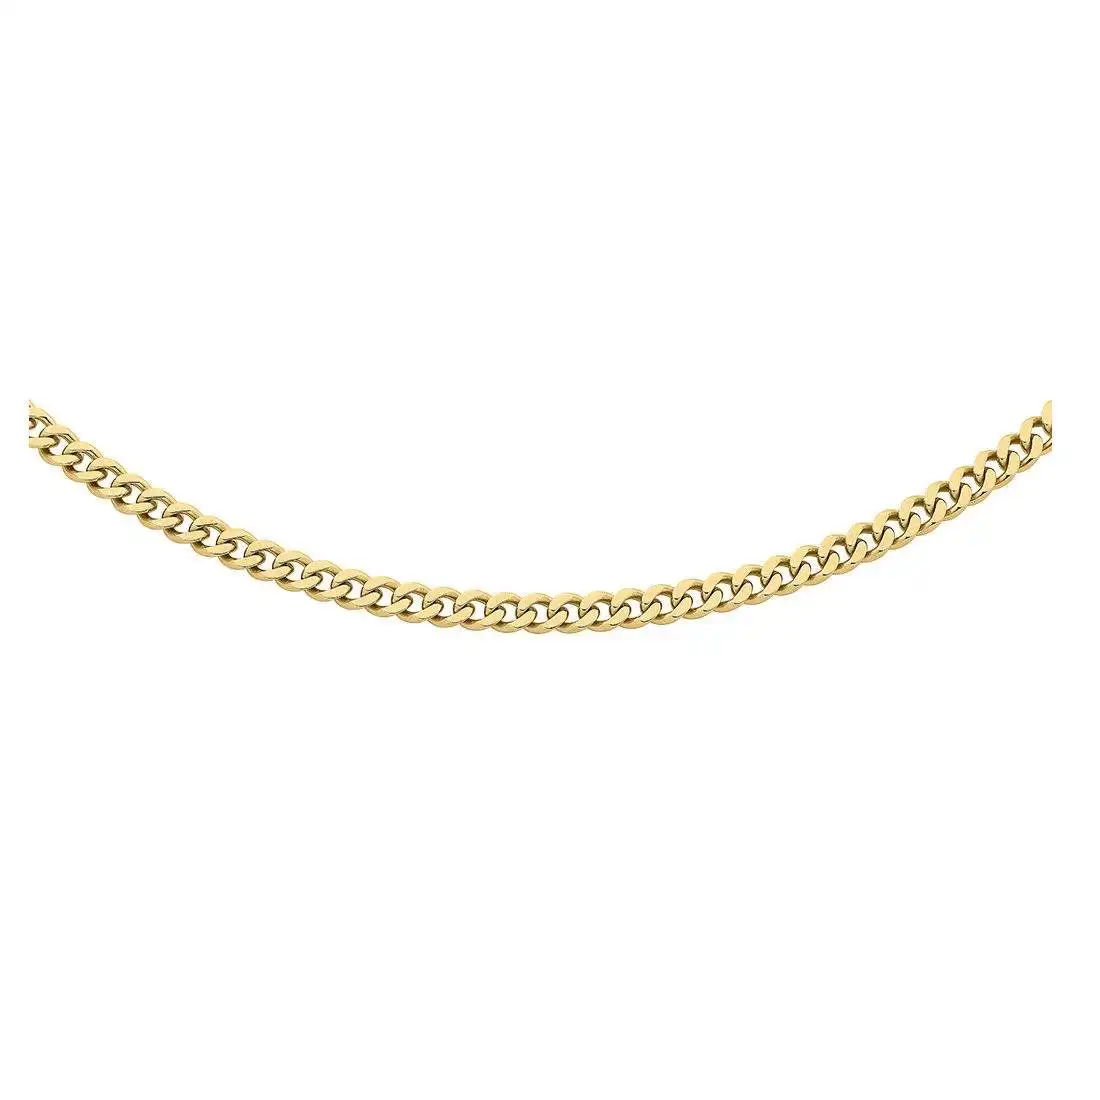 Stainless Steel Gold Colour Men's Curb Chain Necklace 65cm